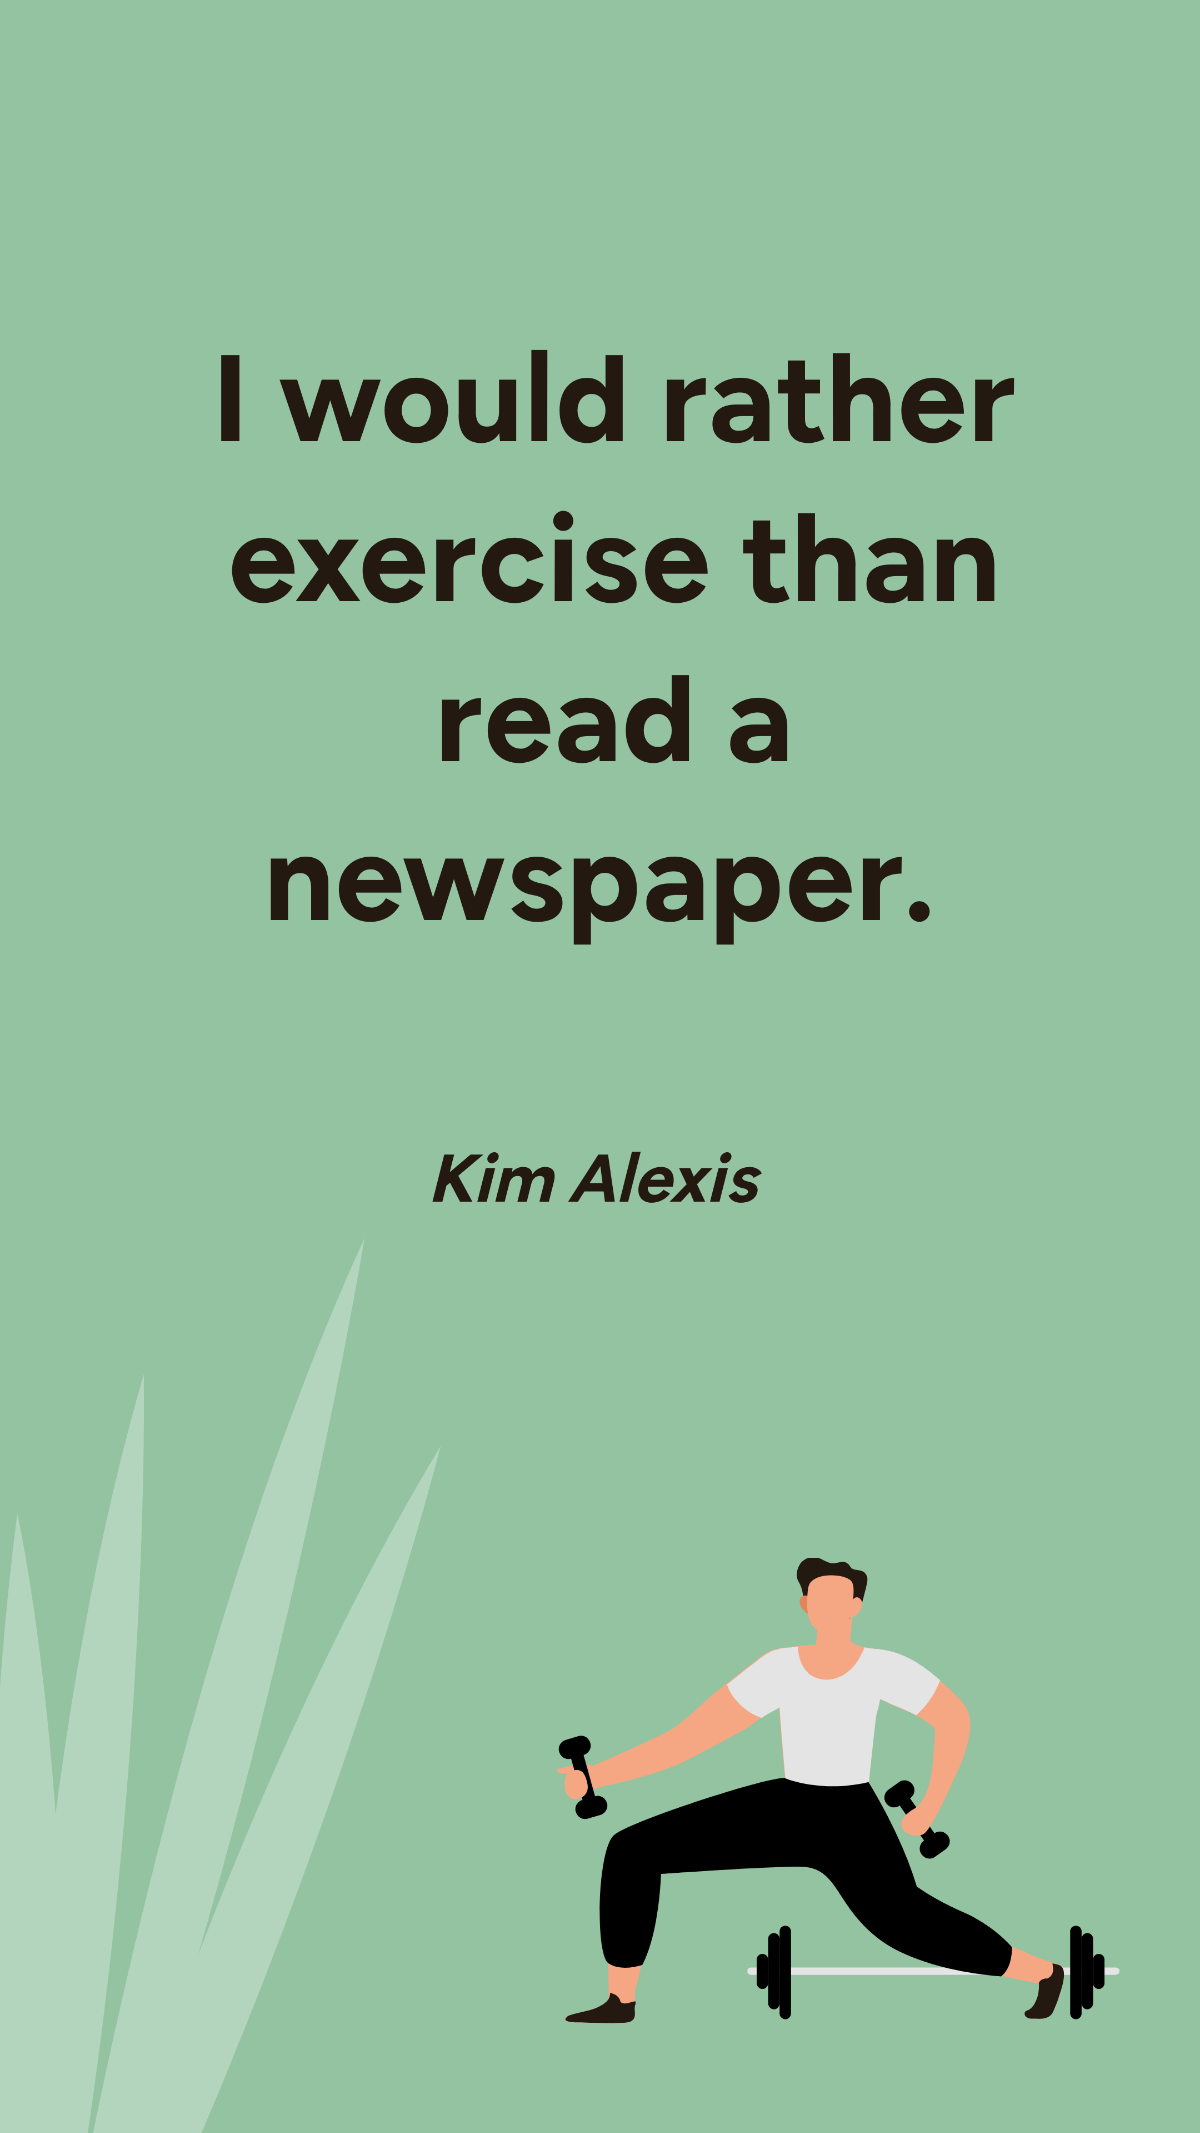 Kim Alexis - I would rather exercise than read a newspaper. Template